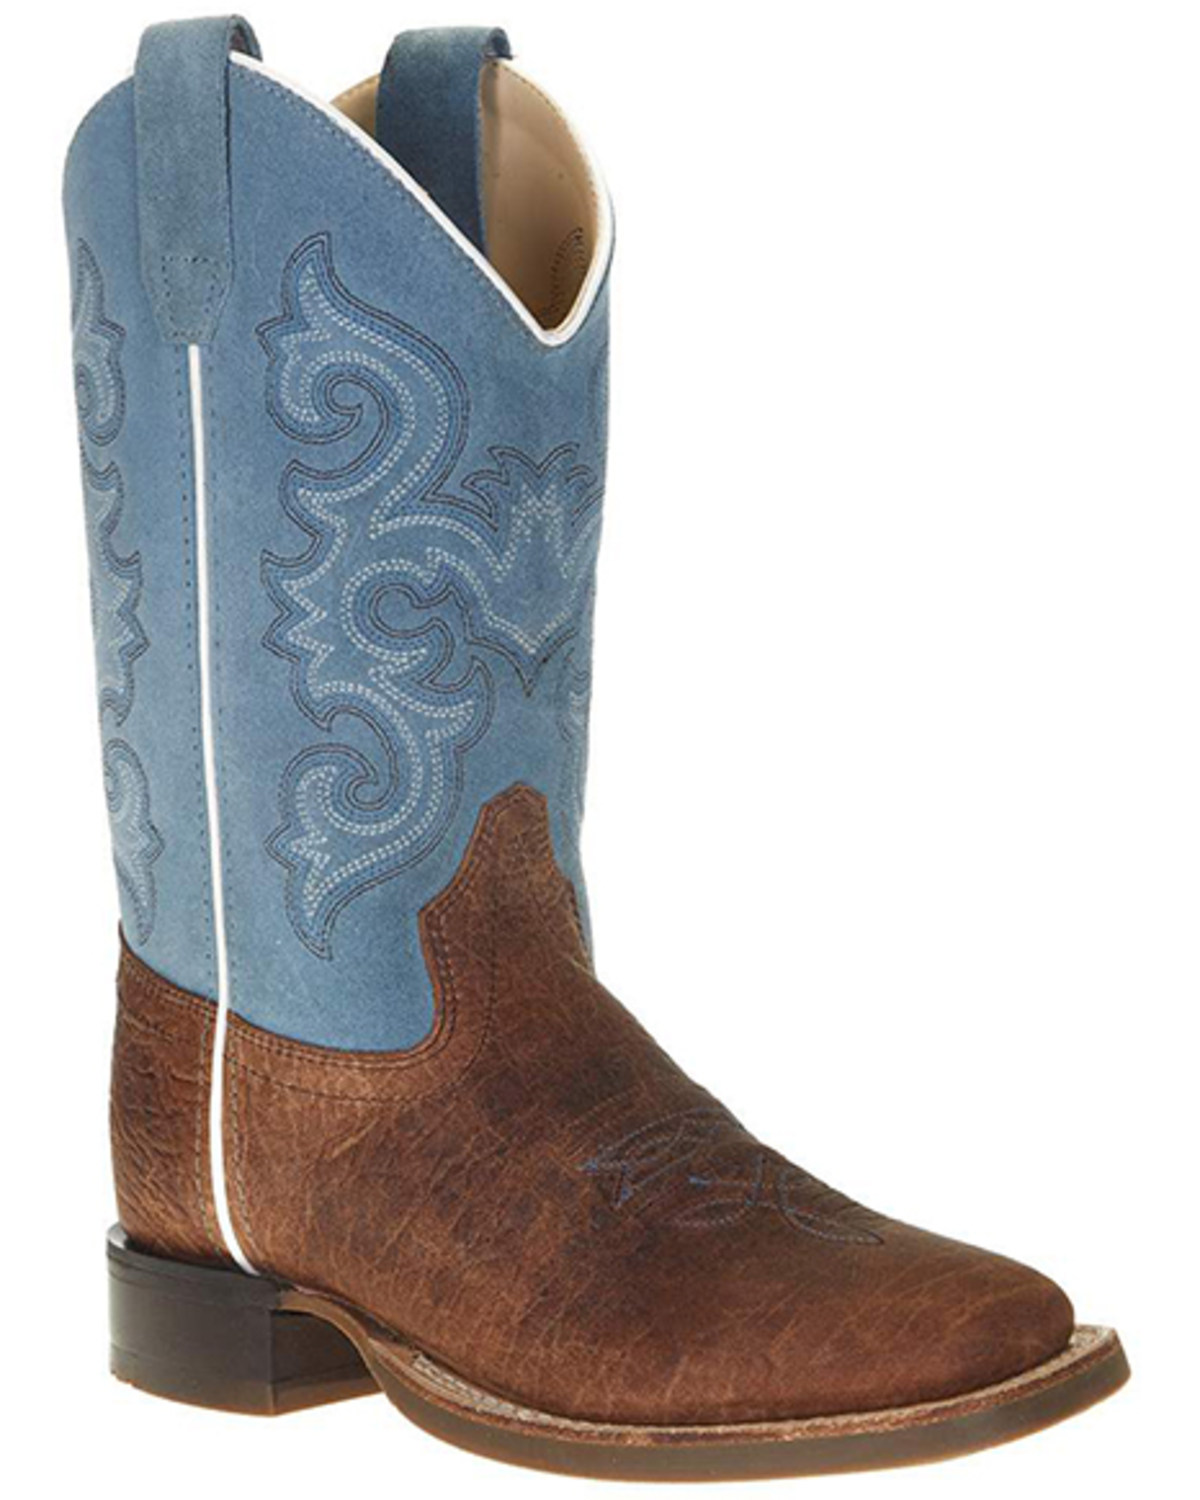 Old West Boys' Western Boots - Broad Square Toe